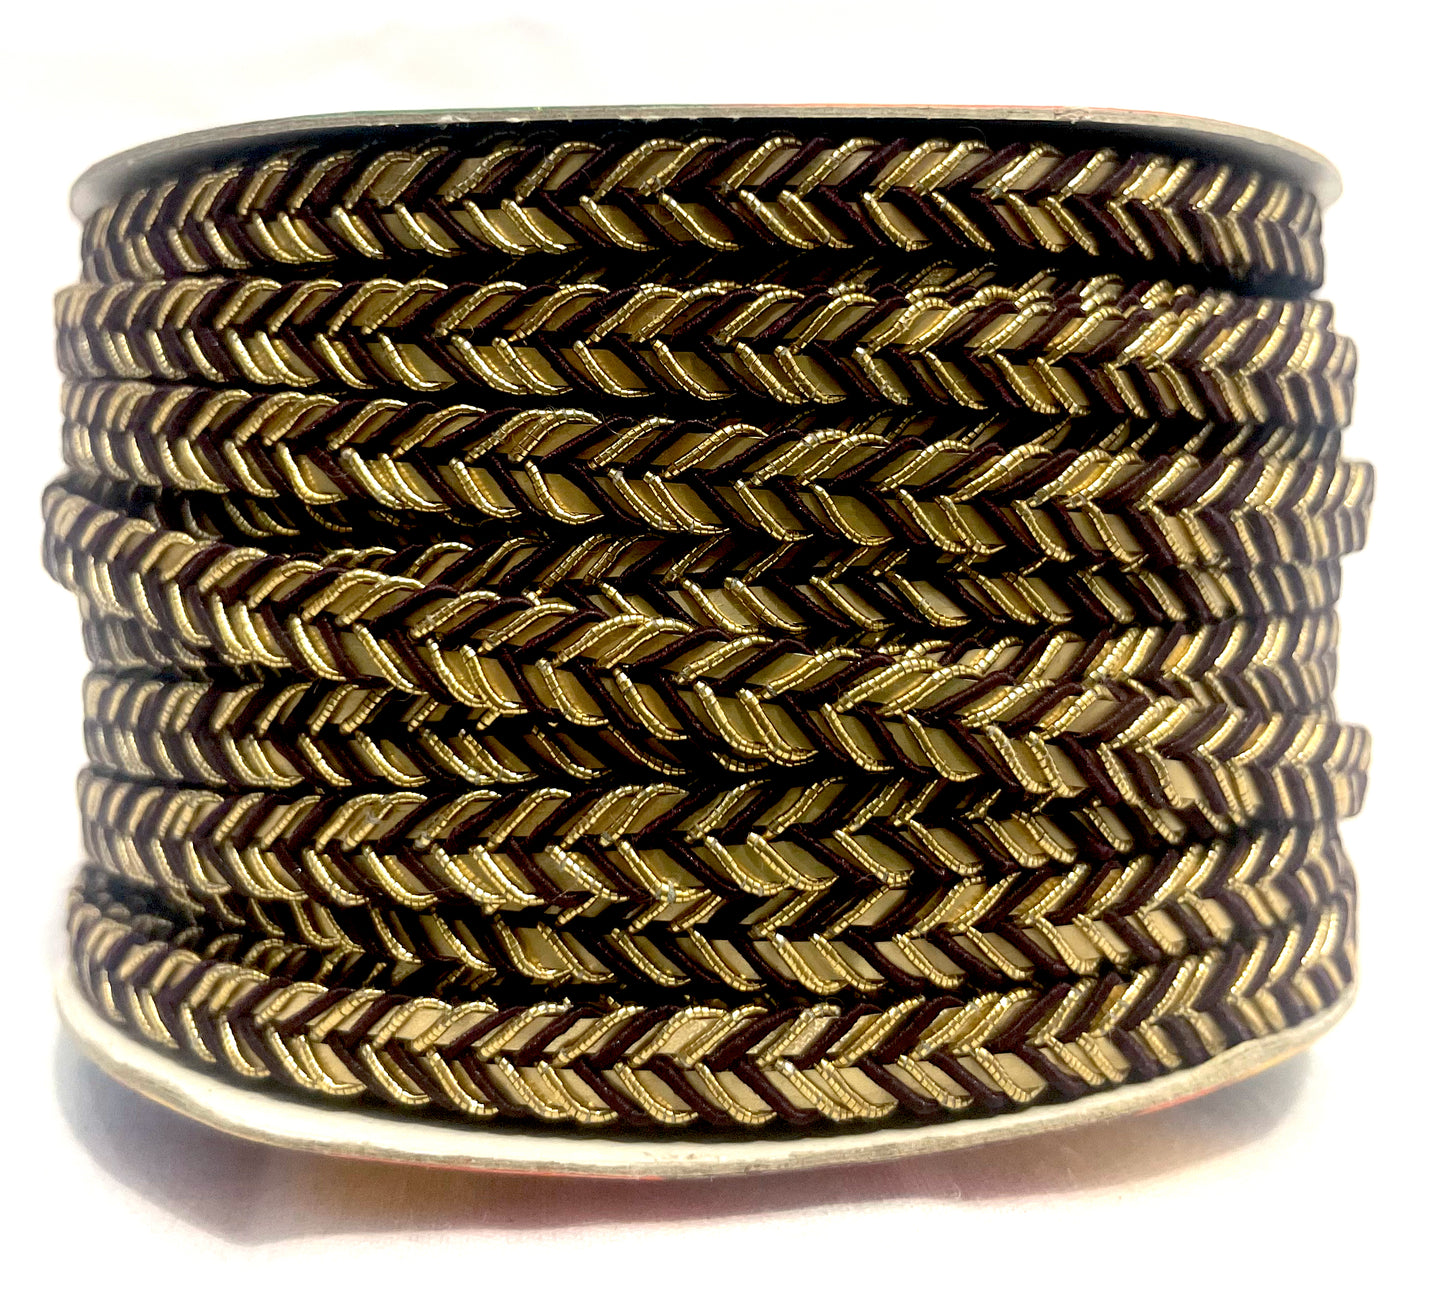 Golden Braid Border, Black And Golden,  Laces for Dress, Home Décor, Shoe, Bags, Hats, DIY, Handmade, 0.2 inch Broad